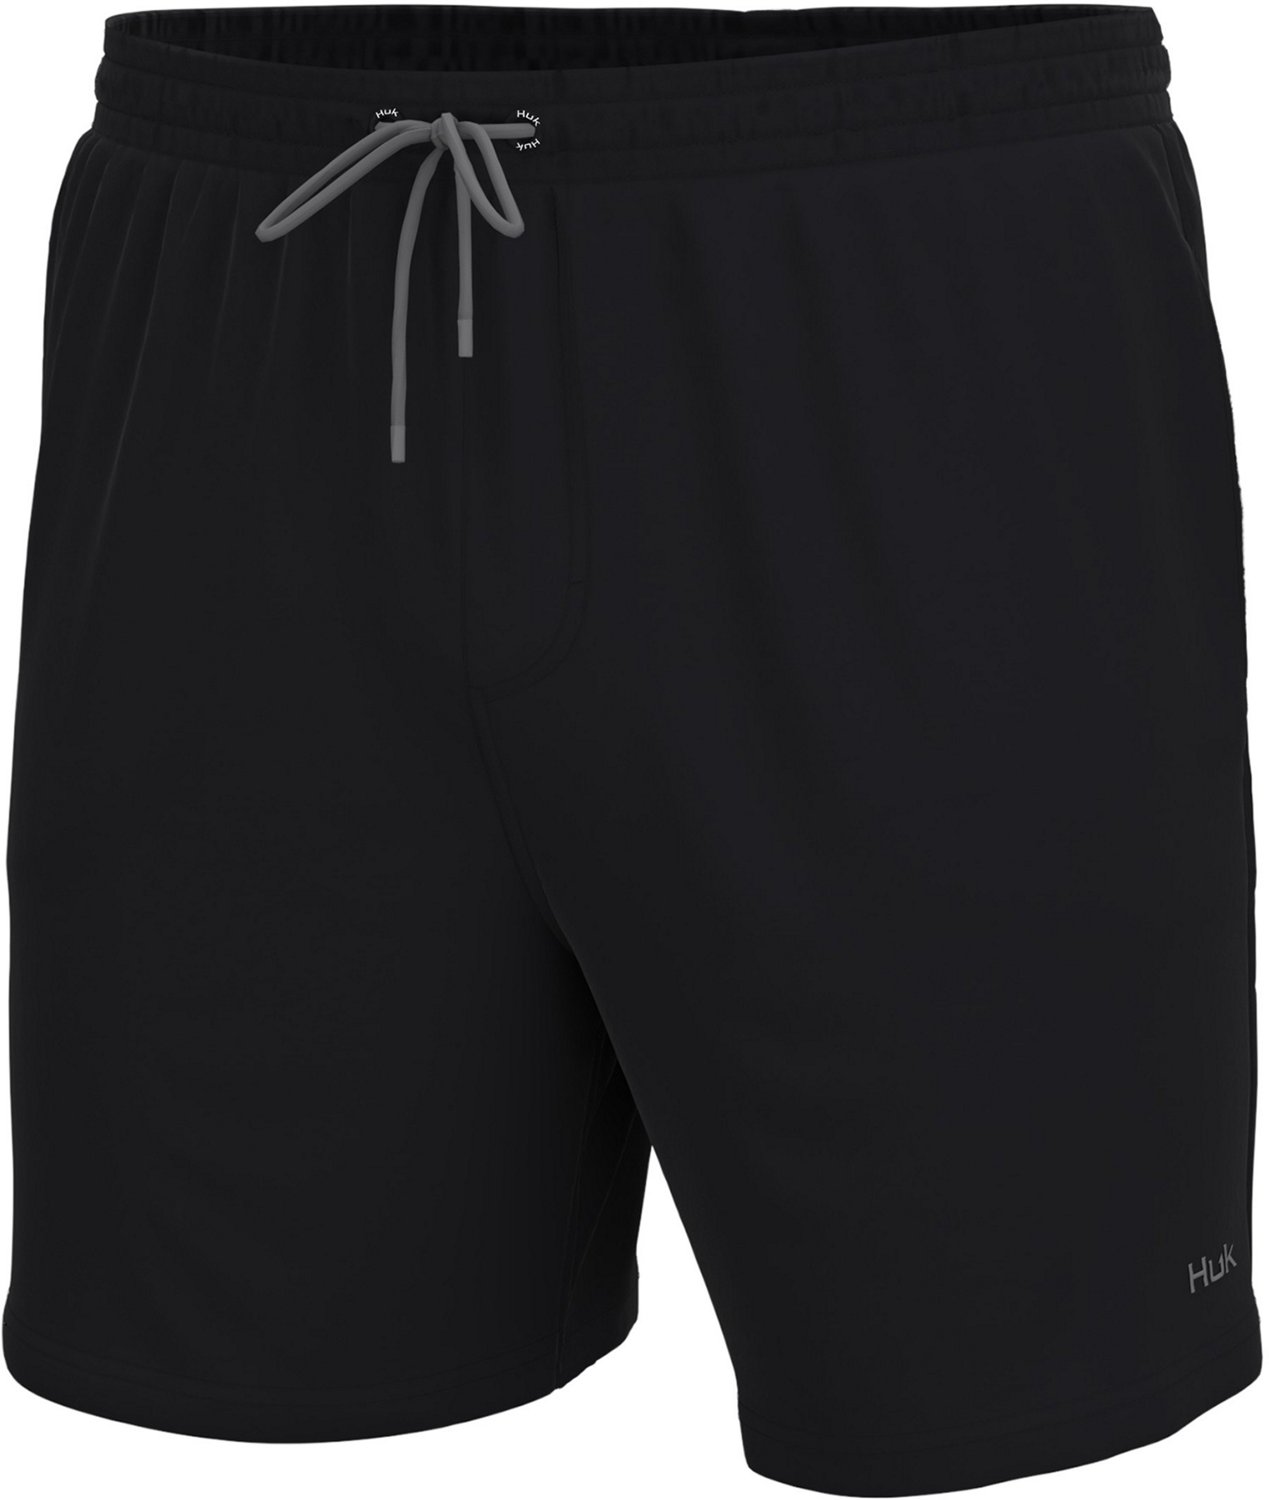 Academy Sports + Outdoors Huk Men's Pursuit Volley Shorts 5.5